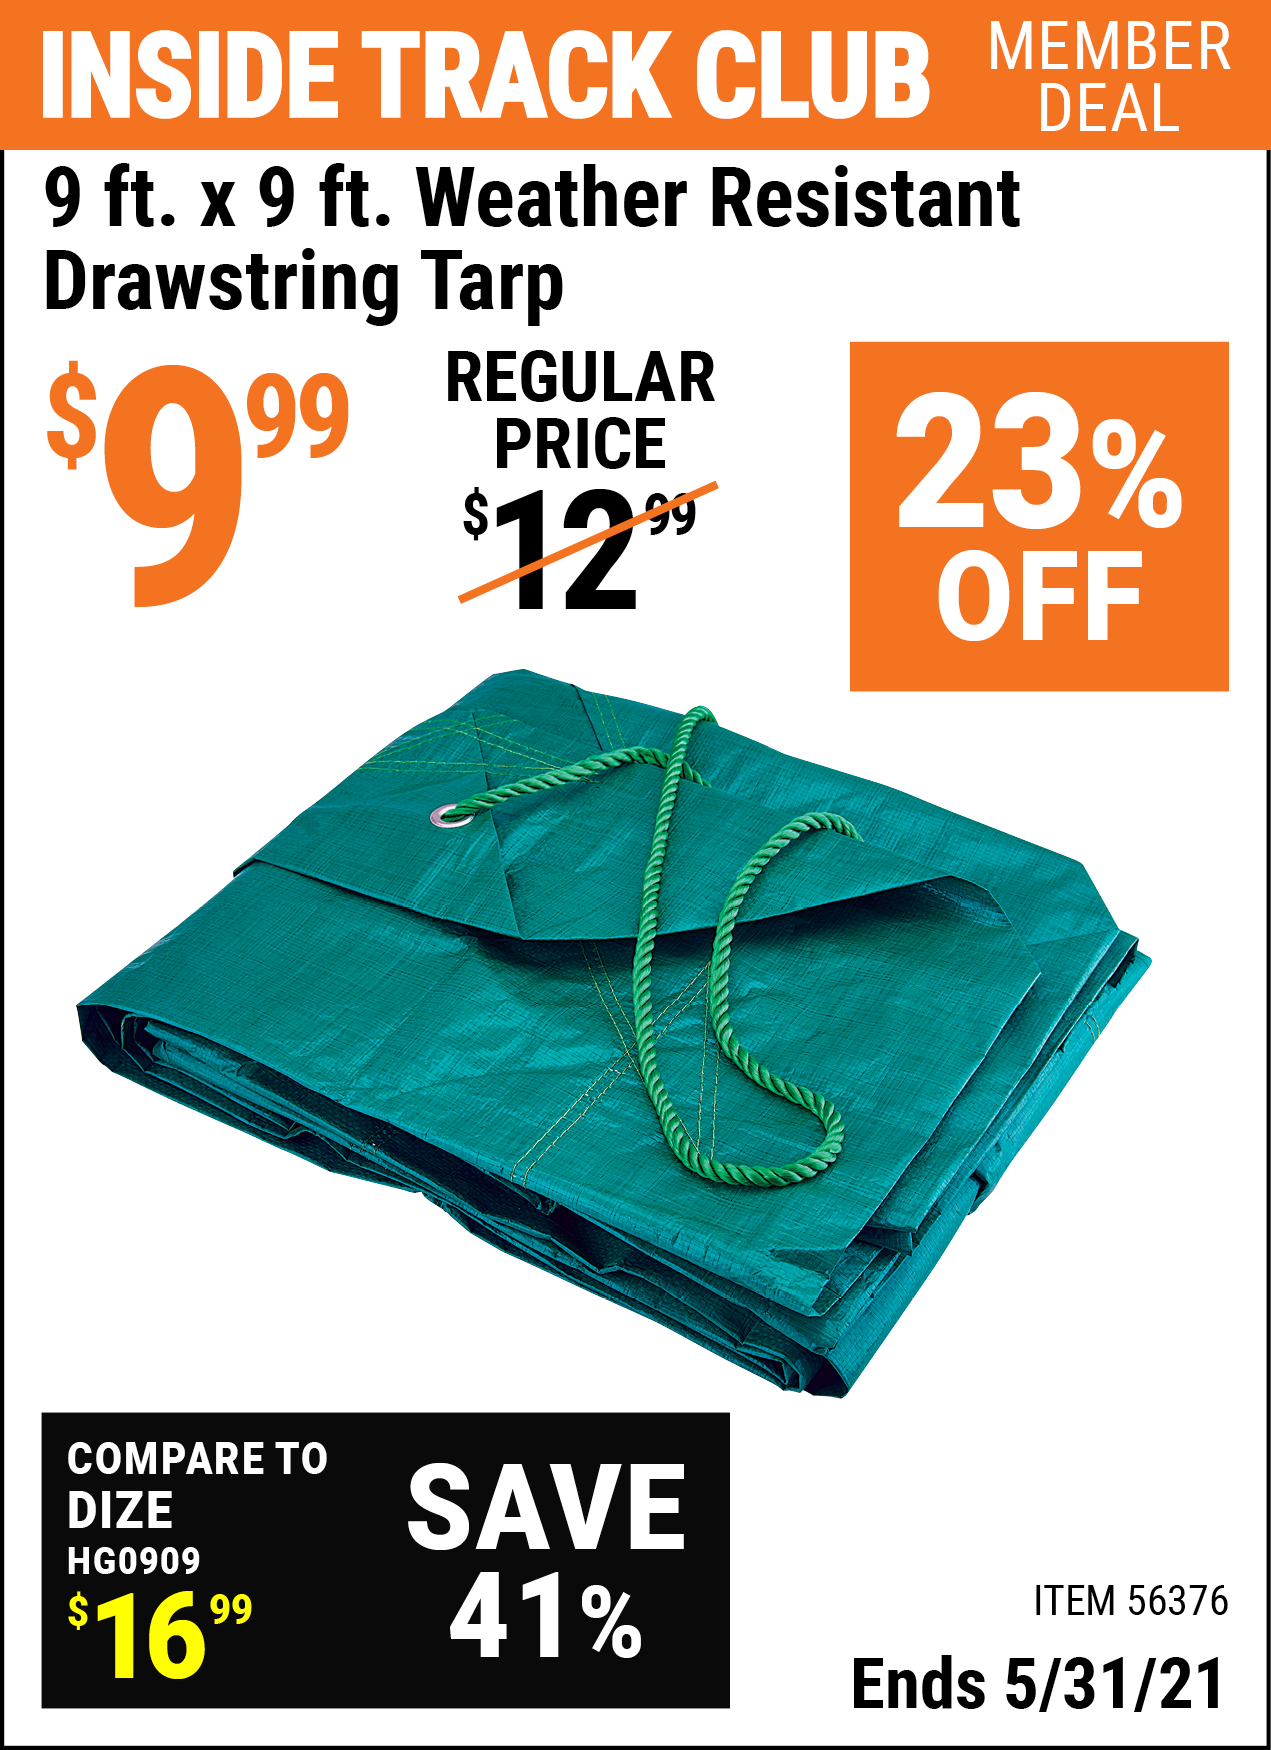 Inside Track Club members can buy the HFT 9 Ft. X 9 Ft. Weather Resistant Drawstring Tarp (Item 56376) for $9.99, valid through 5/31/2021.